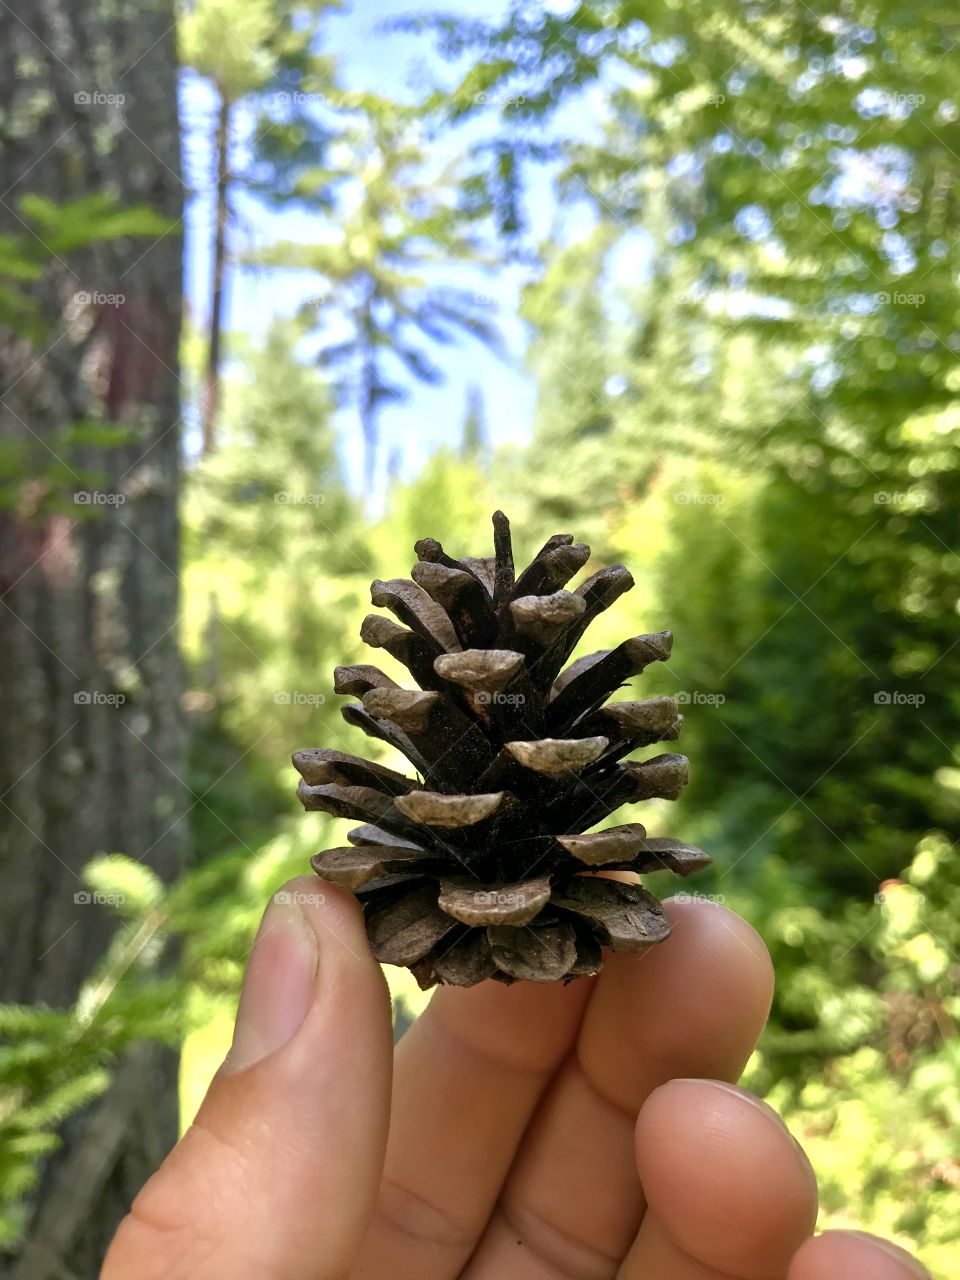 A pinecone discovery in a brilliant green pine forest. 